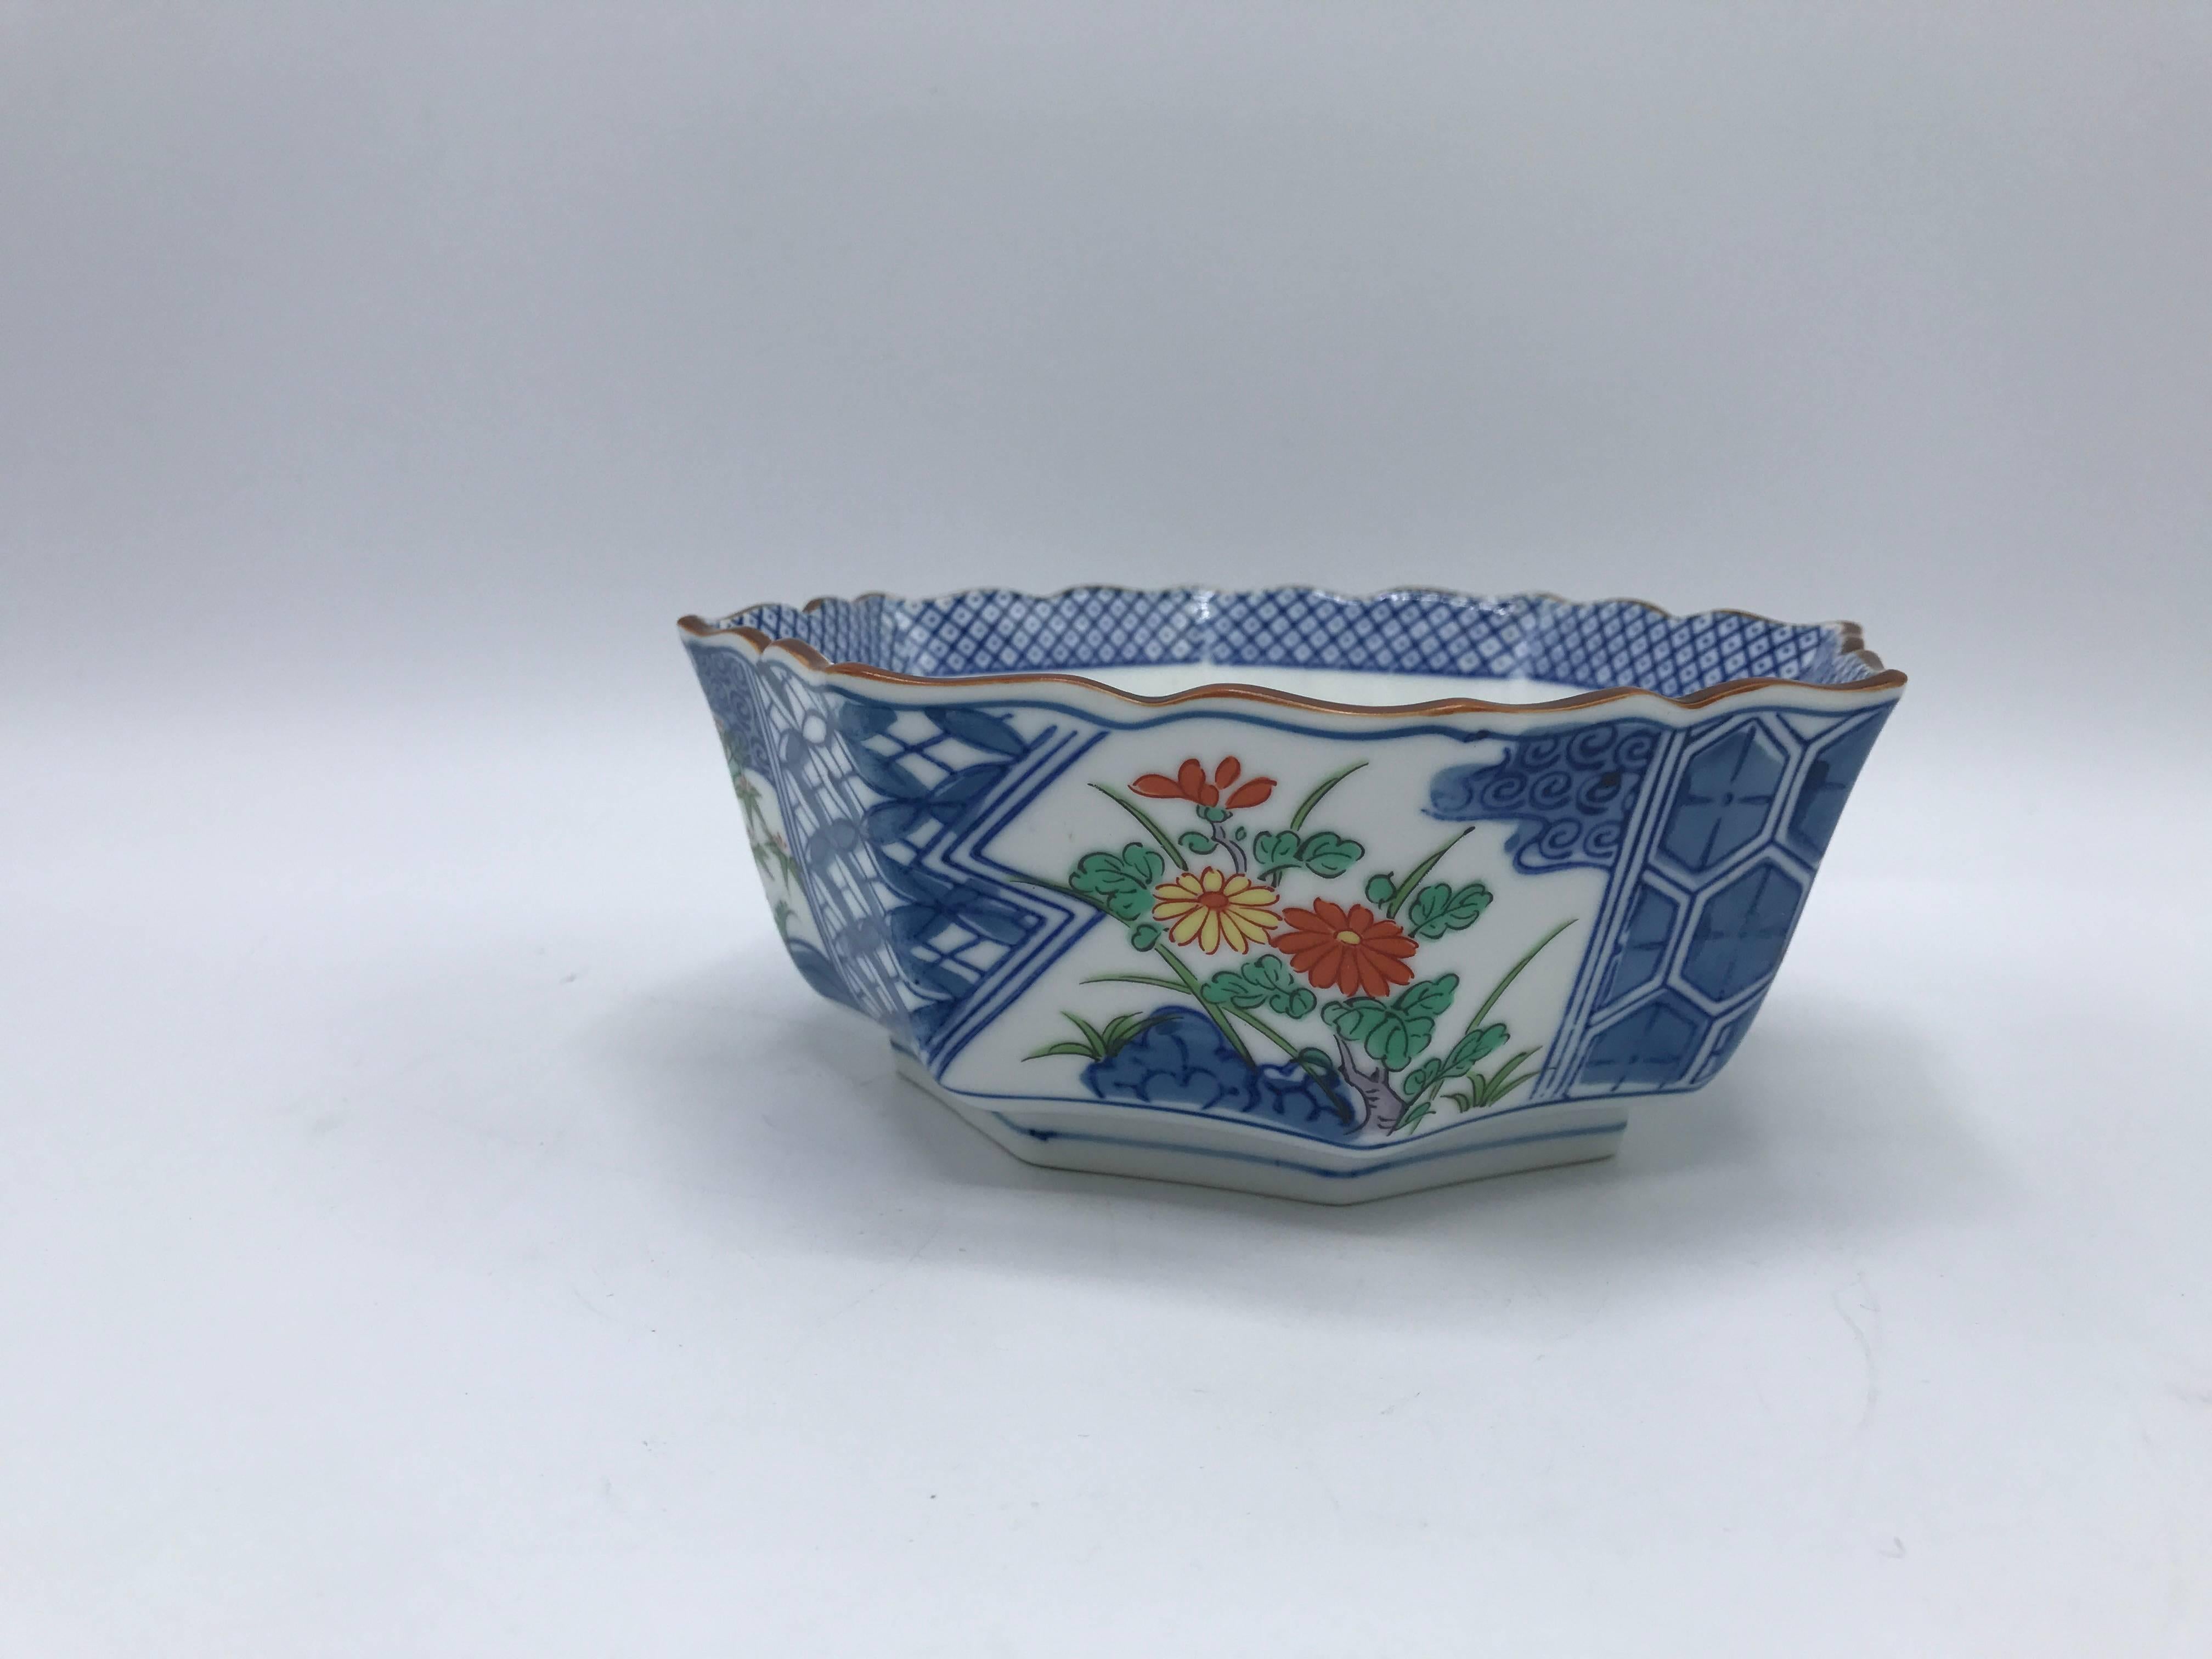 Offered is a gorgeous, 1980s Tiffany & Co. blue and white chinoiserie bowl with a hand-painted floral and bamboo motif.